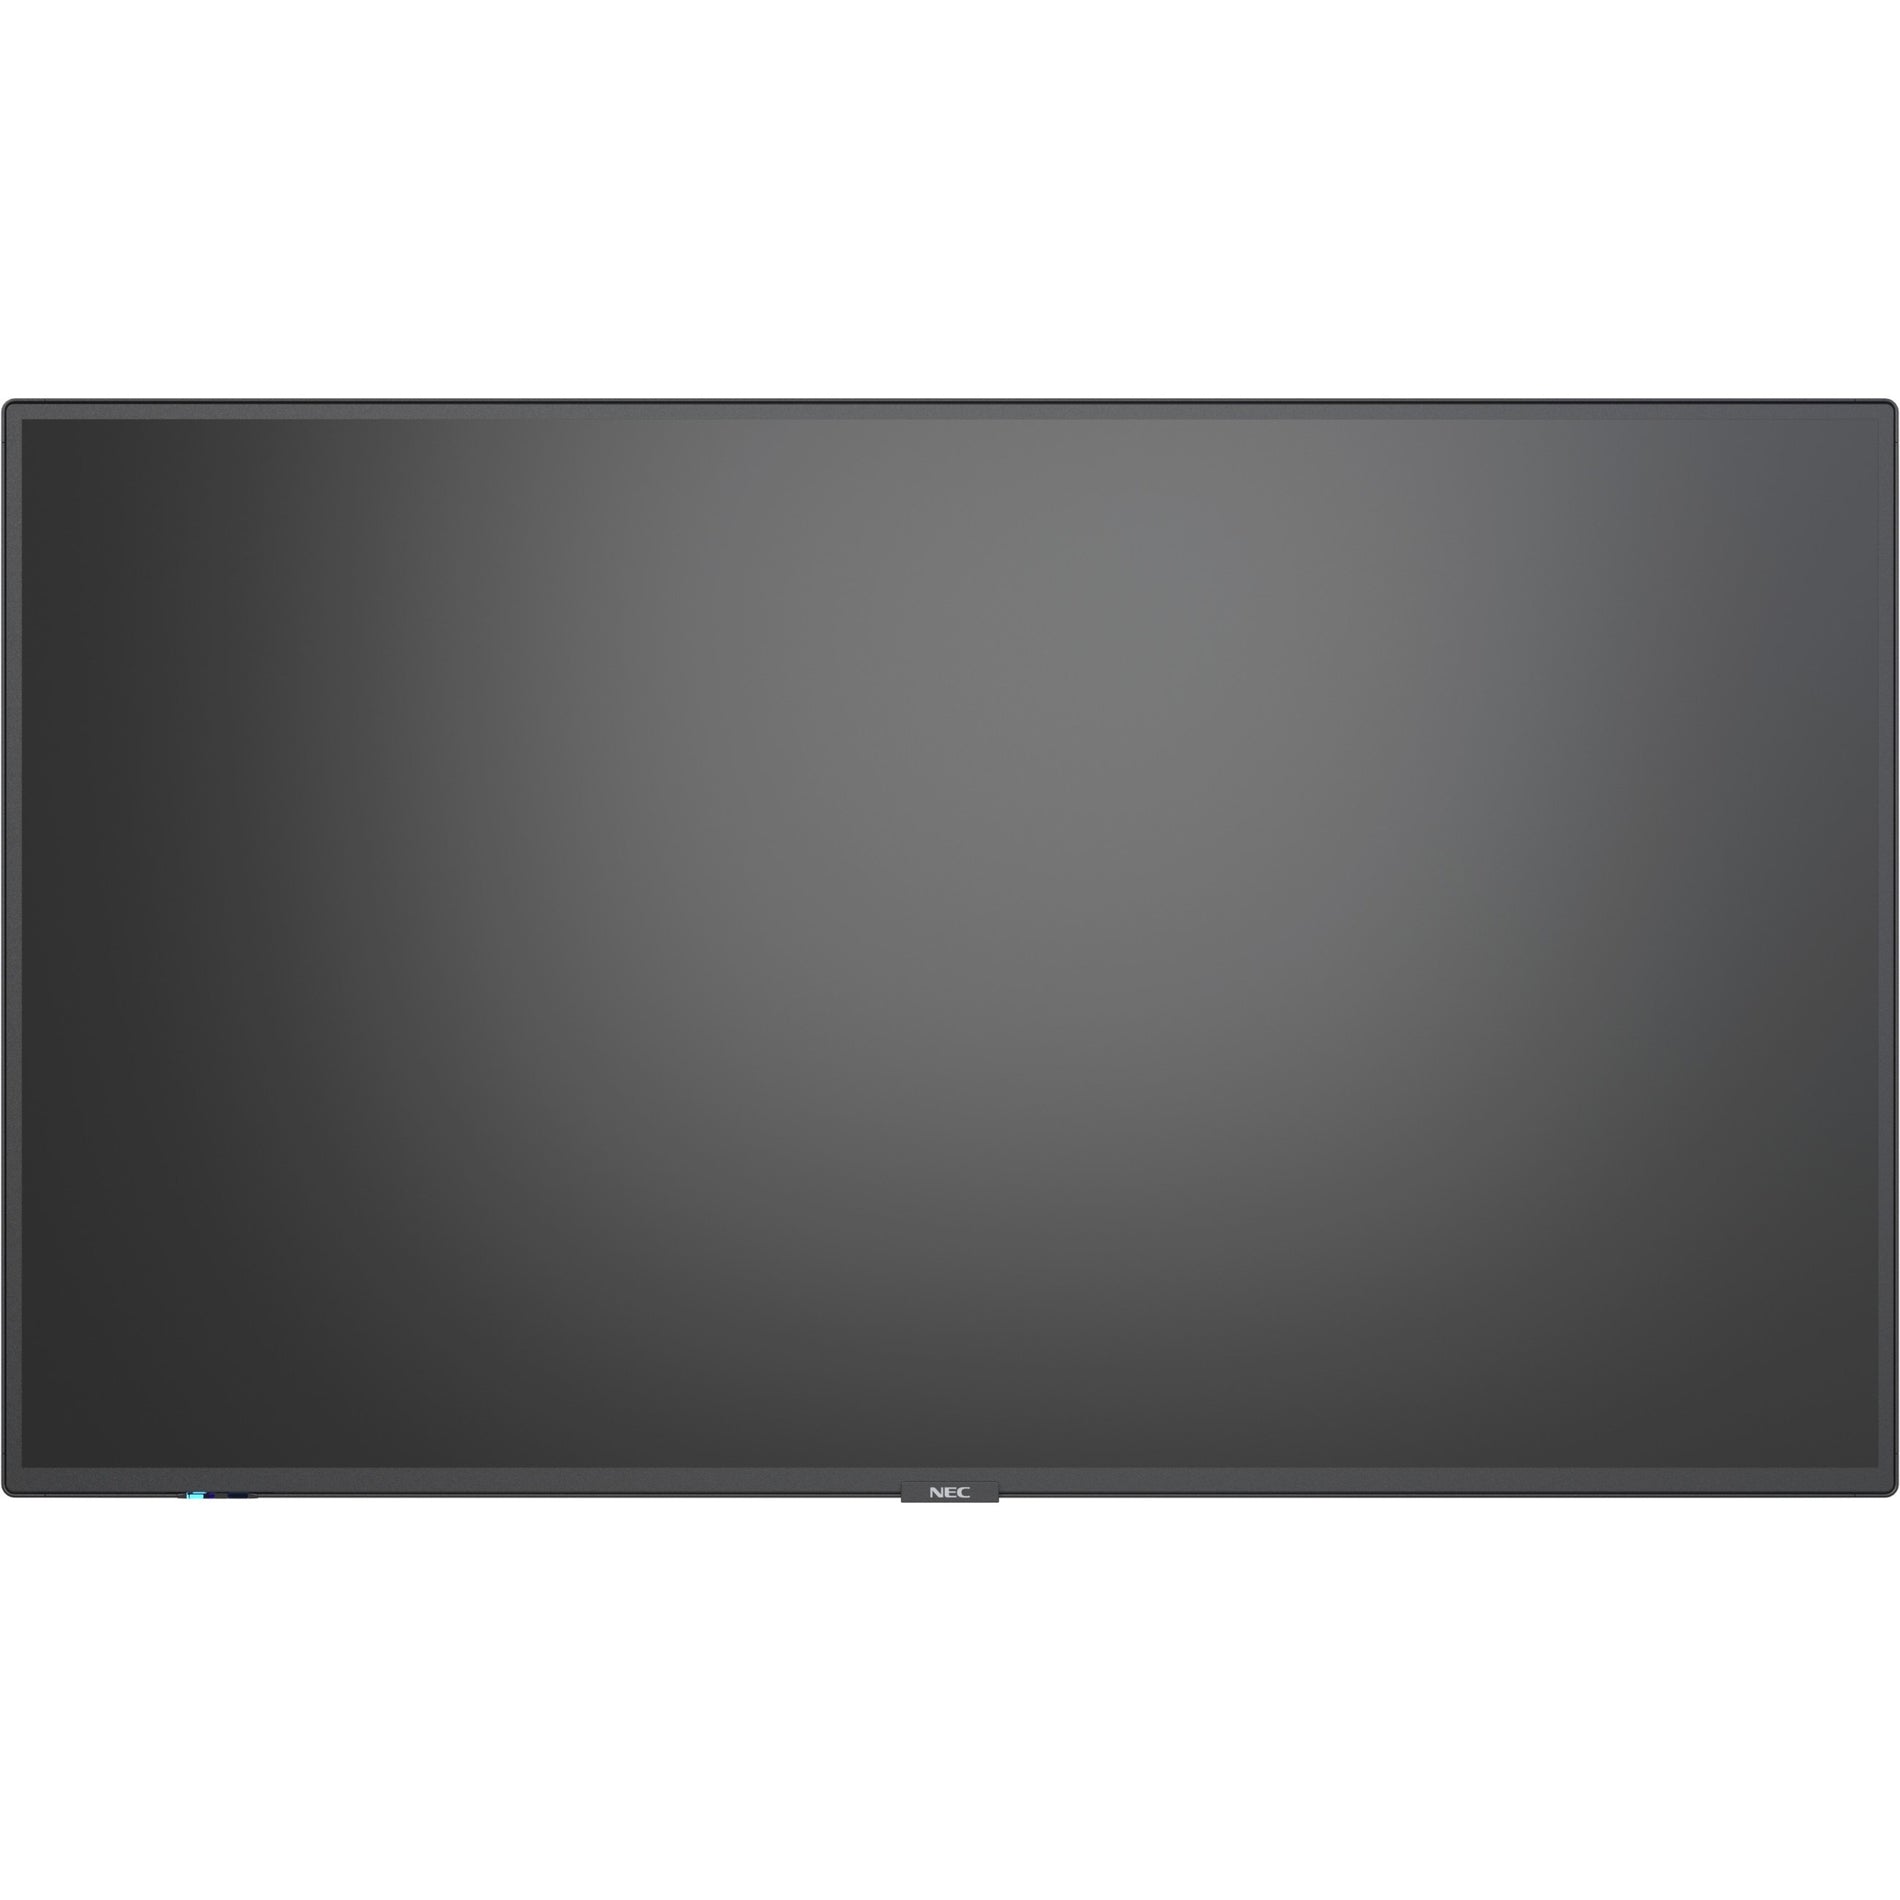 NEC Display 43" Wide Color Gamut Ultra High Definition Professional Display (MA431) Alternate-Image4 image